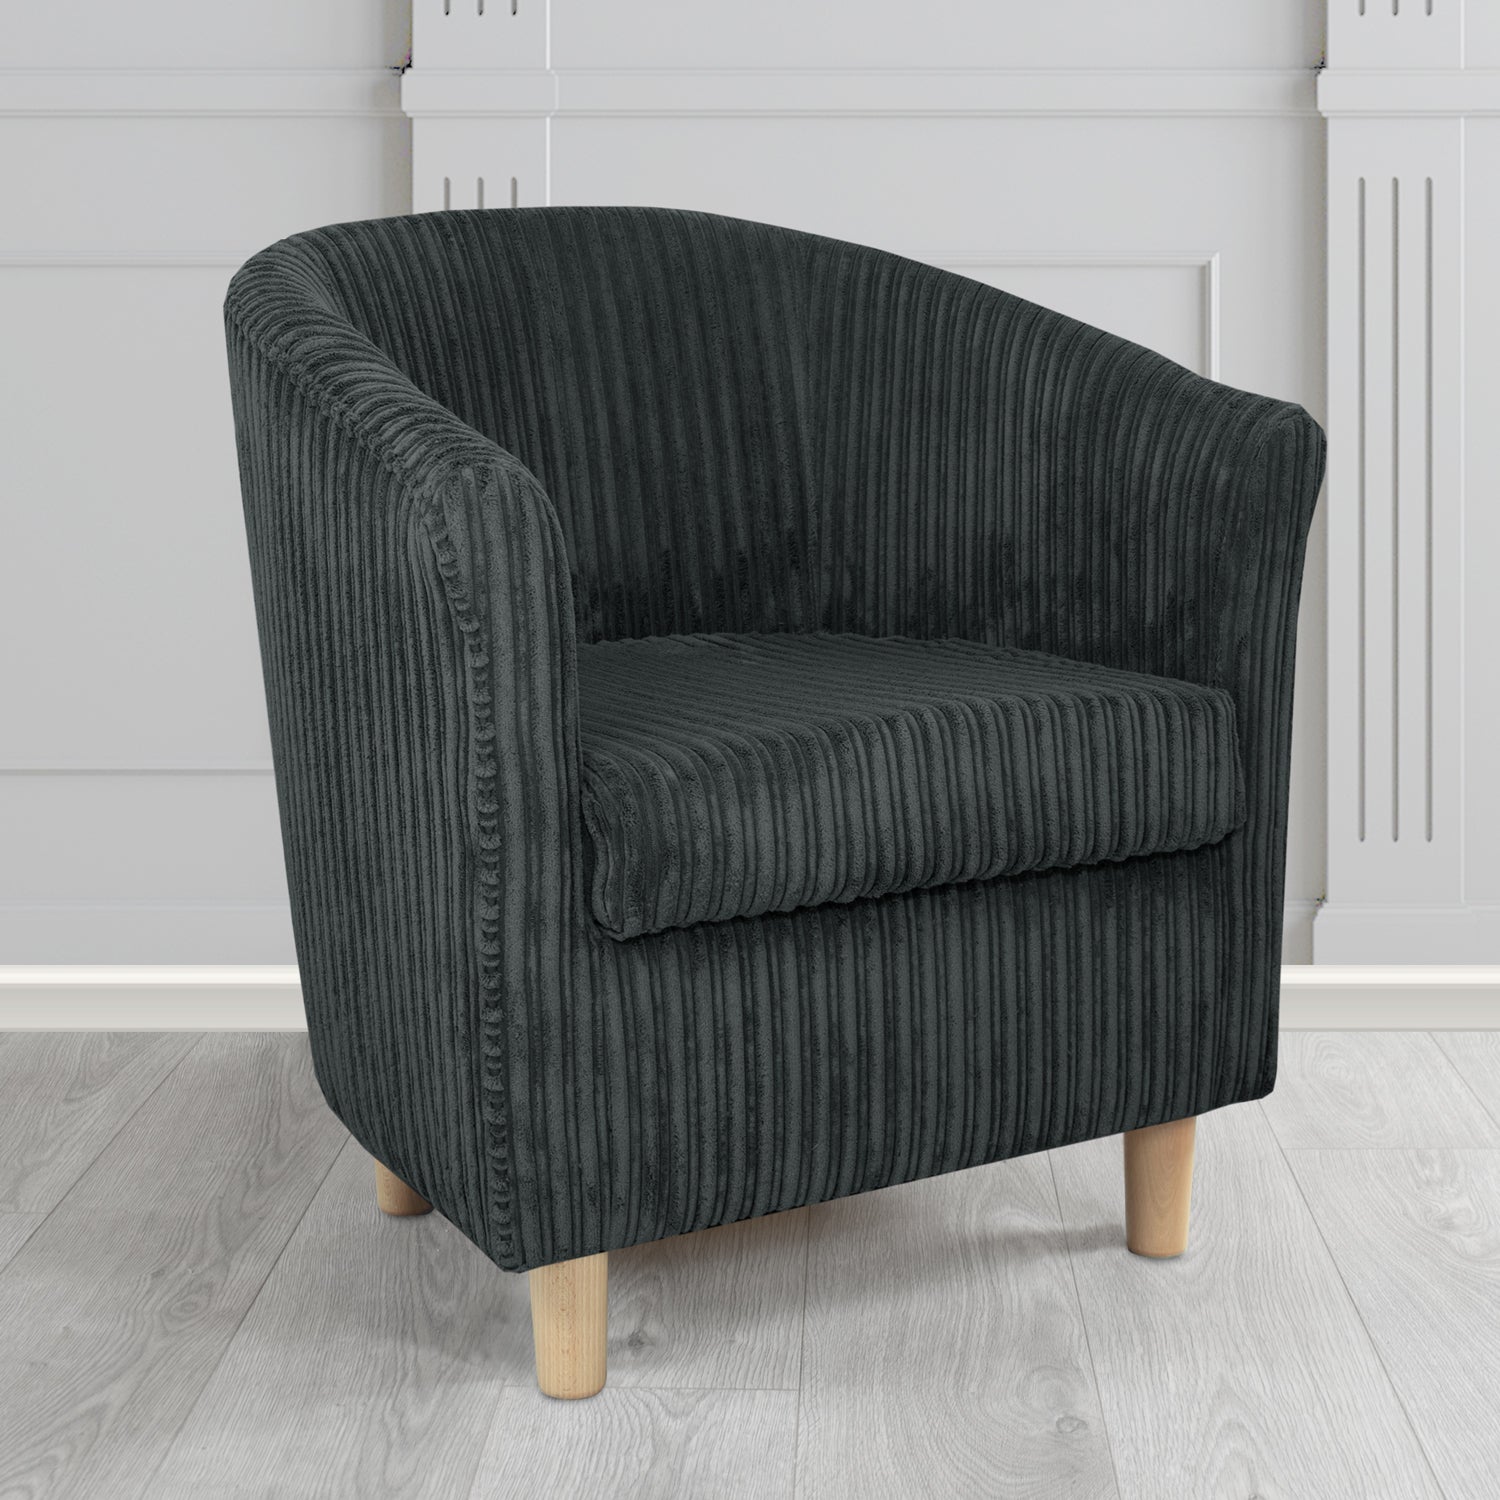 Tuscany in Conway Black Plain Textured Fabric Tub Chair (6581714550826)